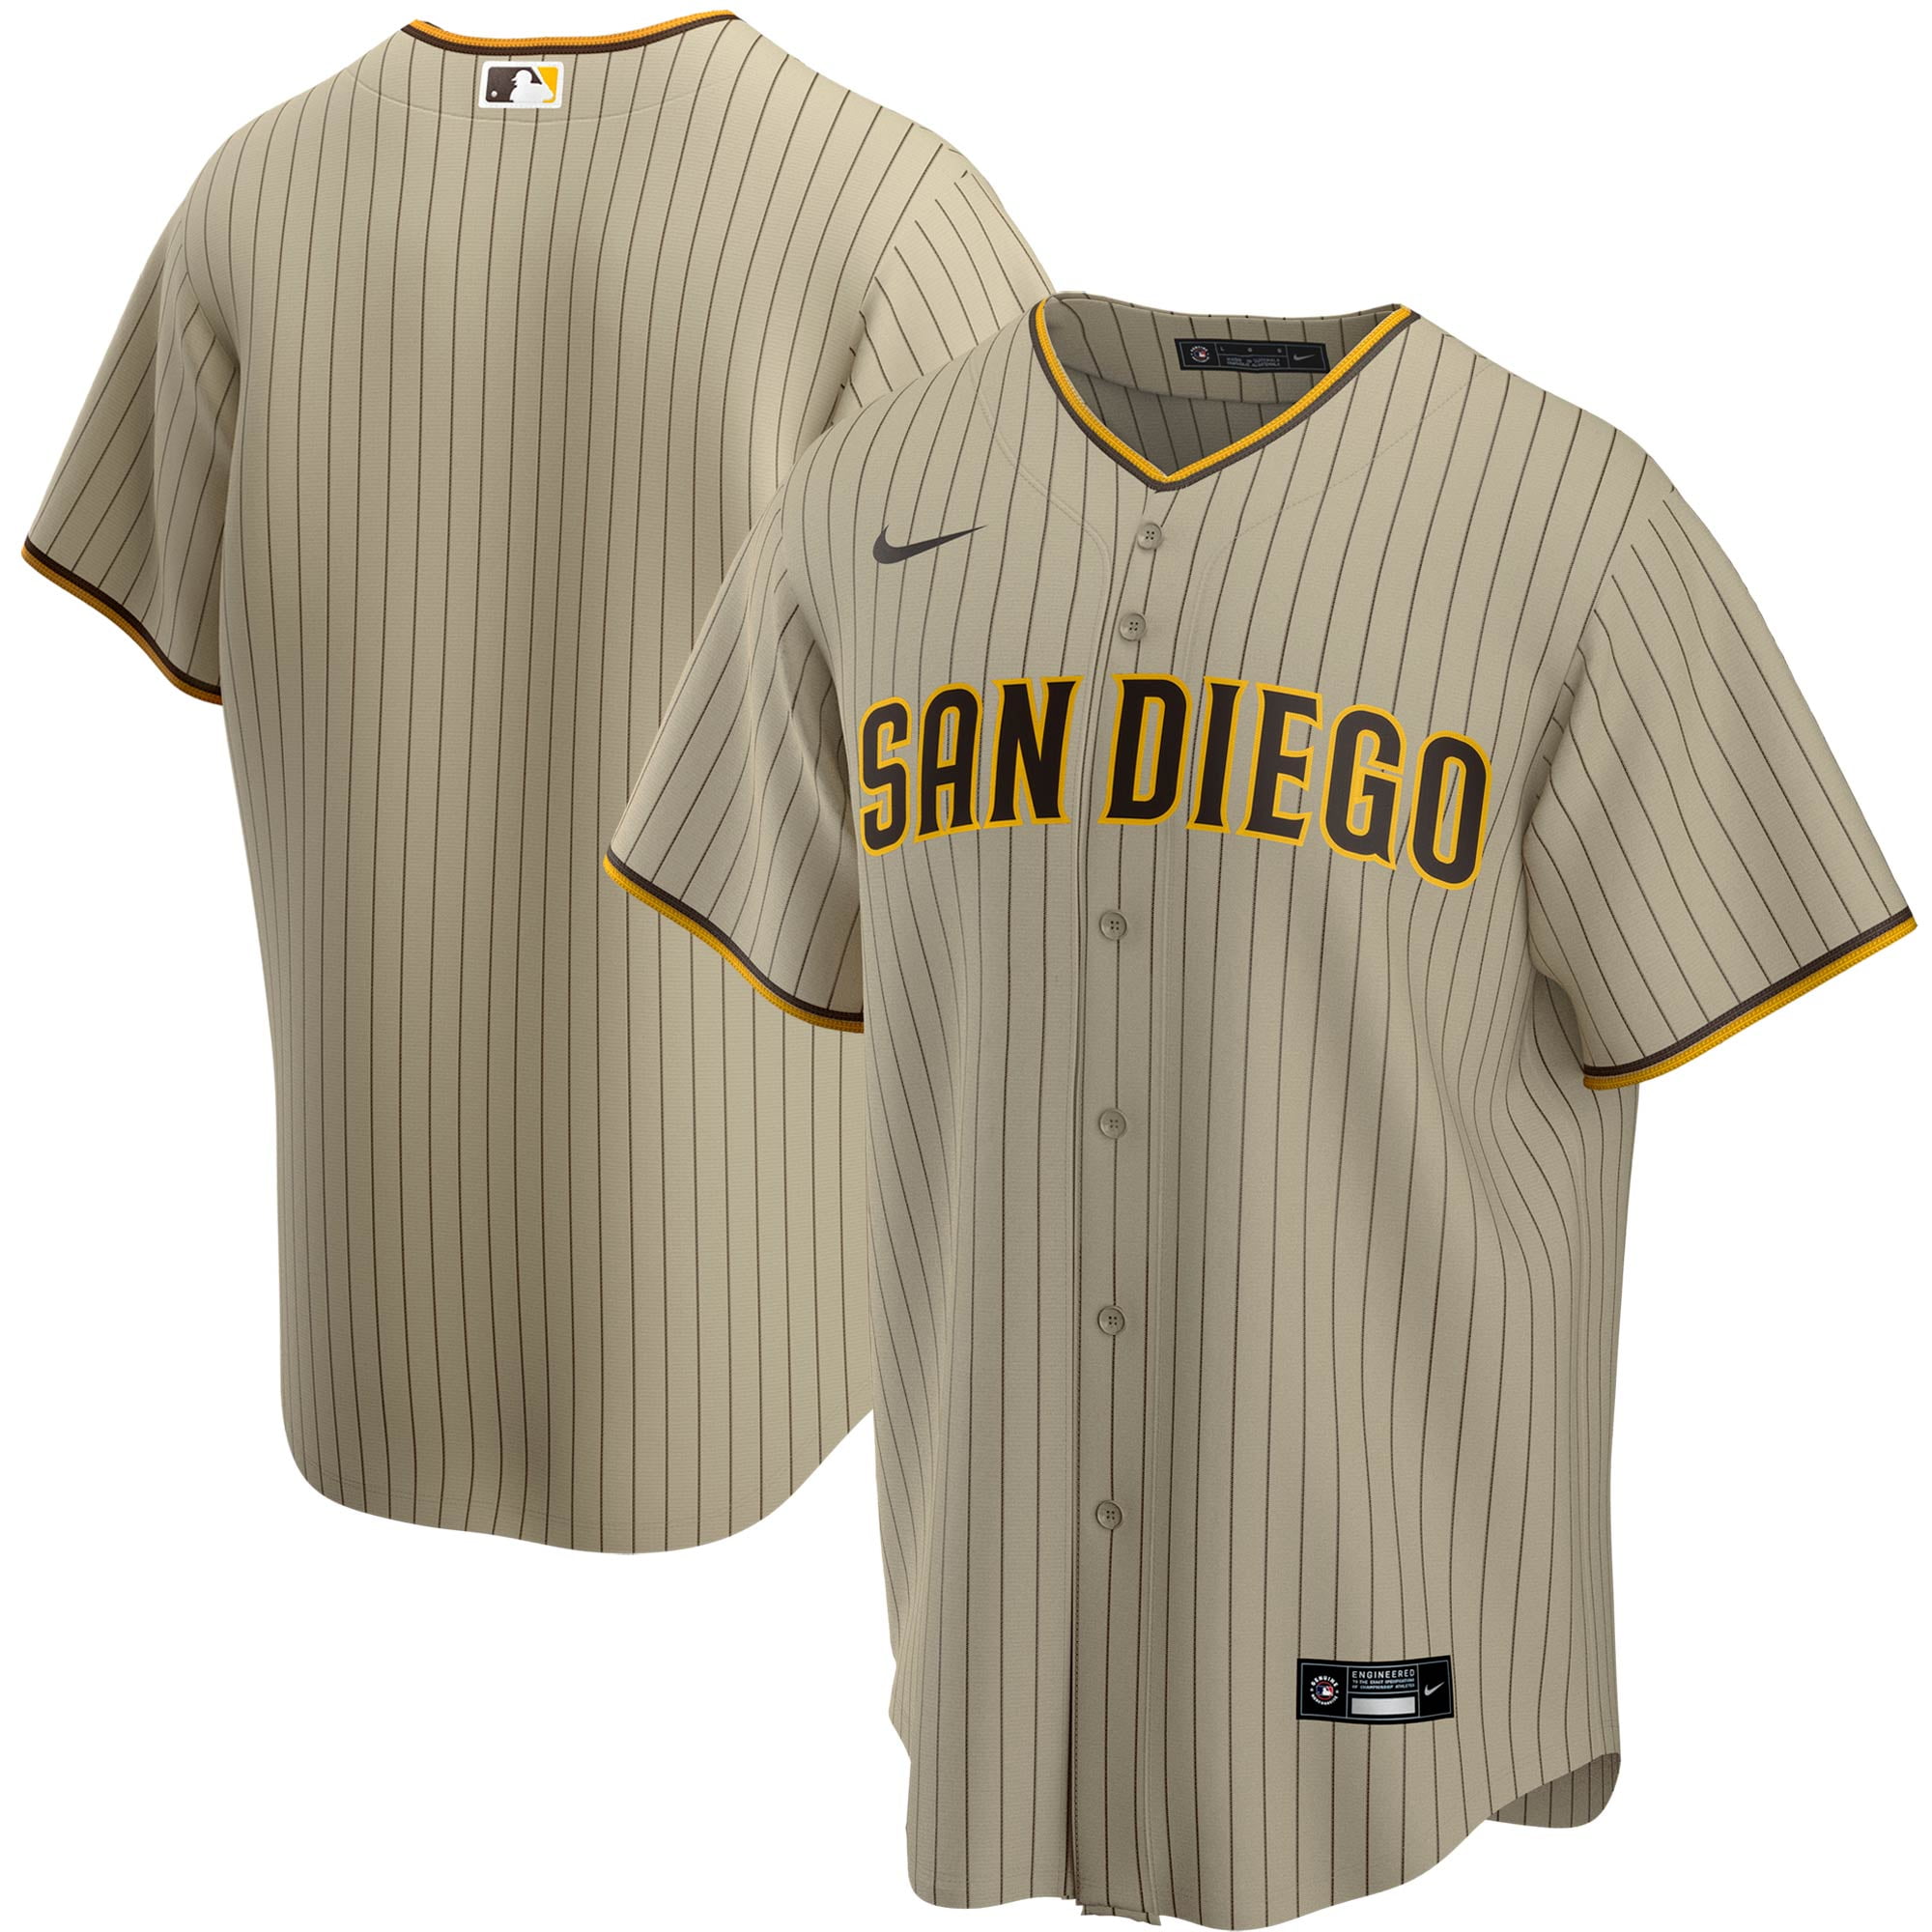 Youth Nike Sand/Brown San Diego Padres Alternate Replica Team Jersey